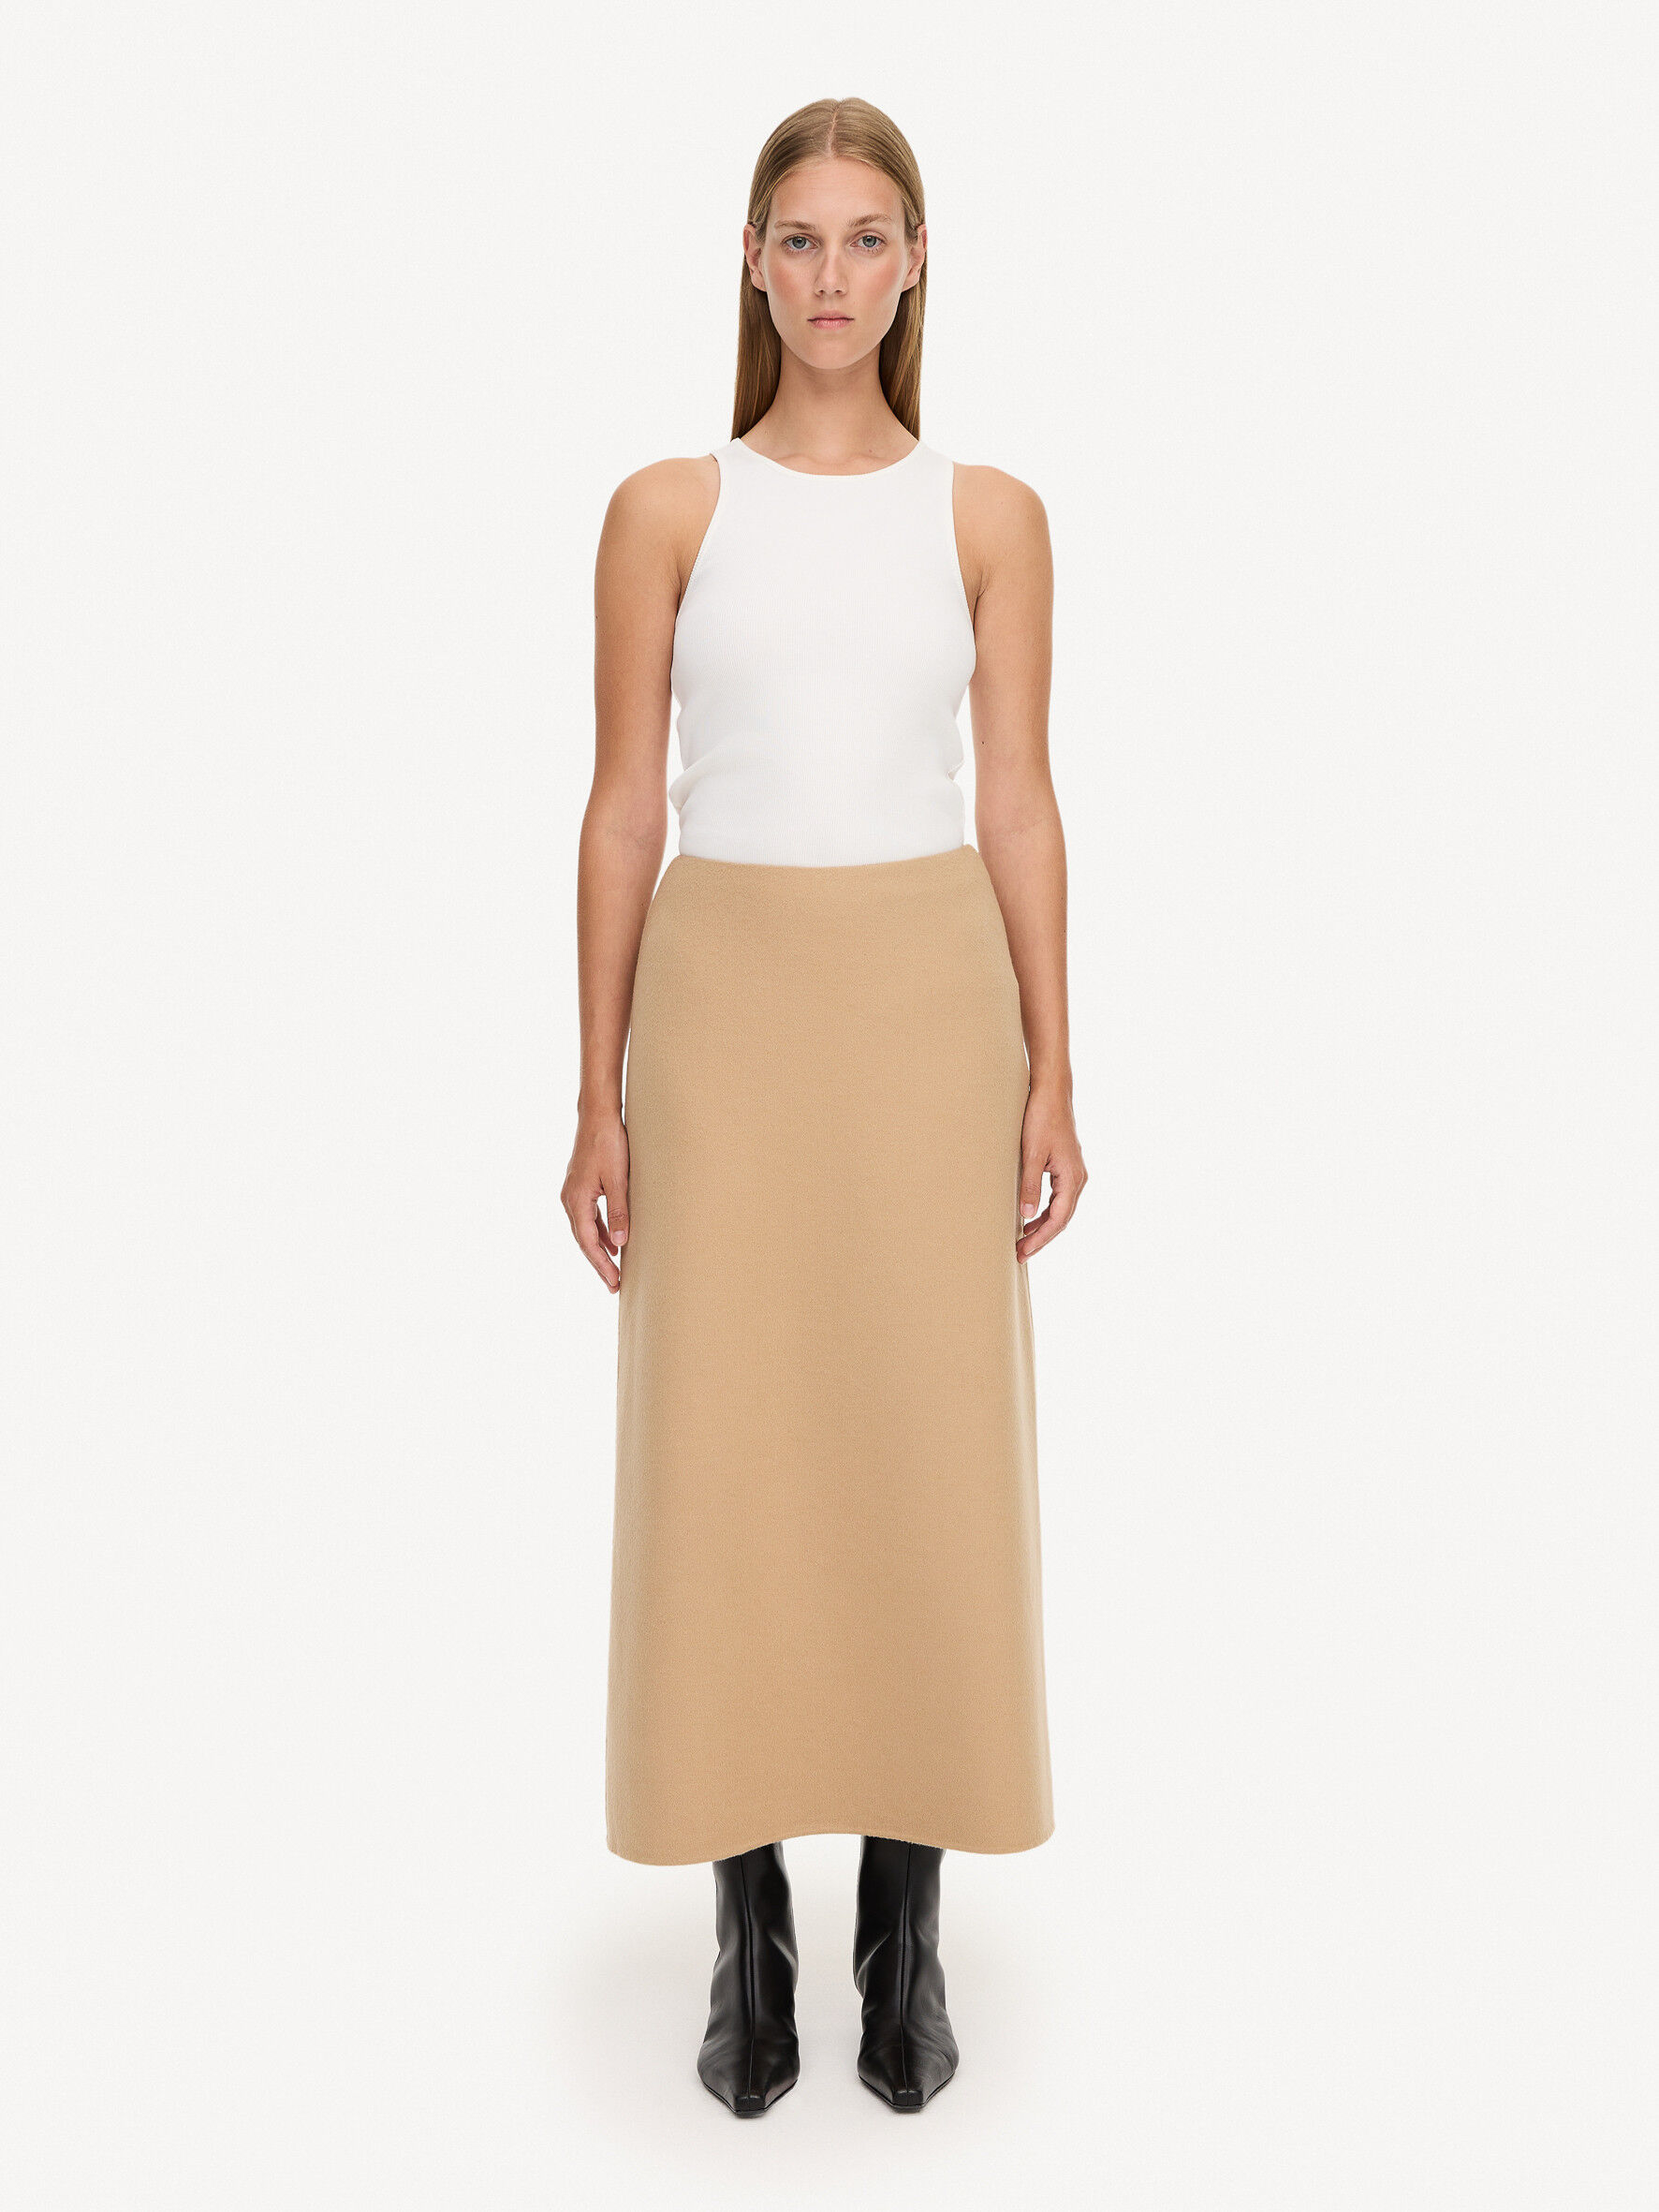 Wool Blend A-Line Skirt | M&S Collection | M&S